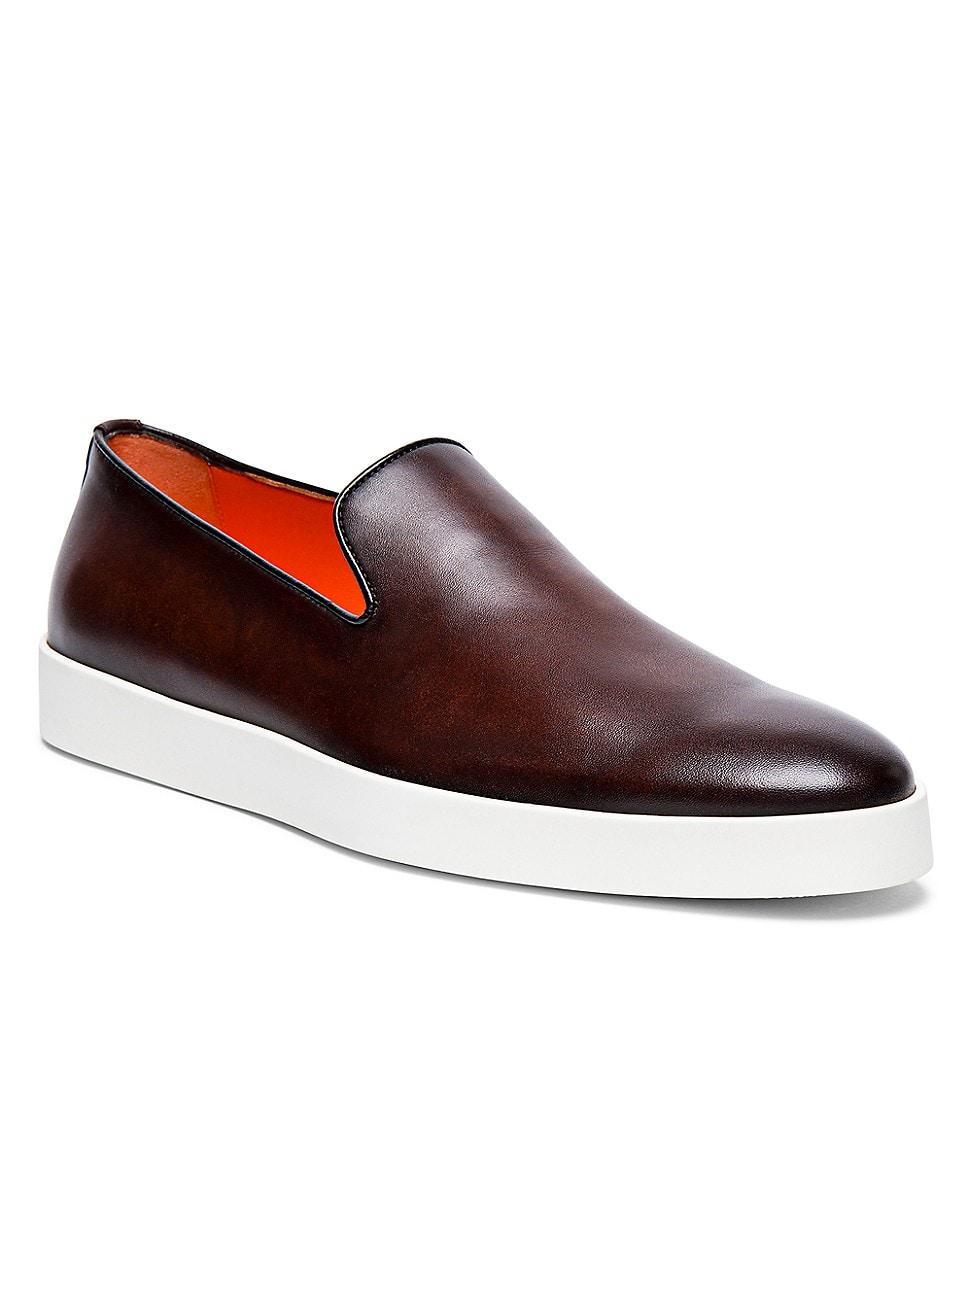 Mens Leather Slip-On Sneakers Product Image